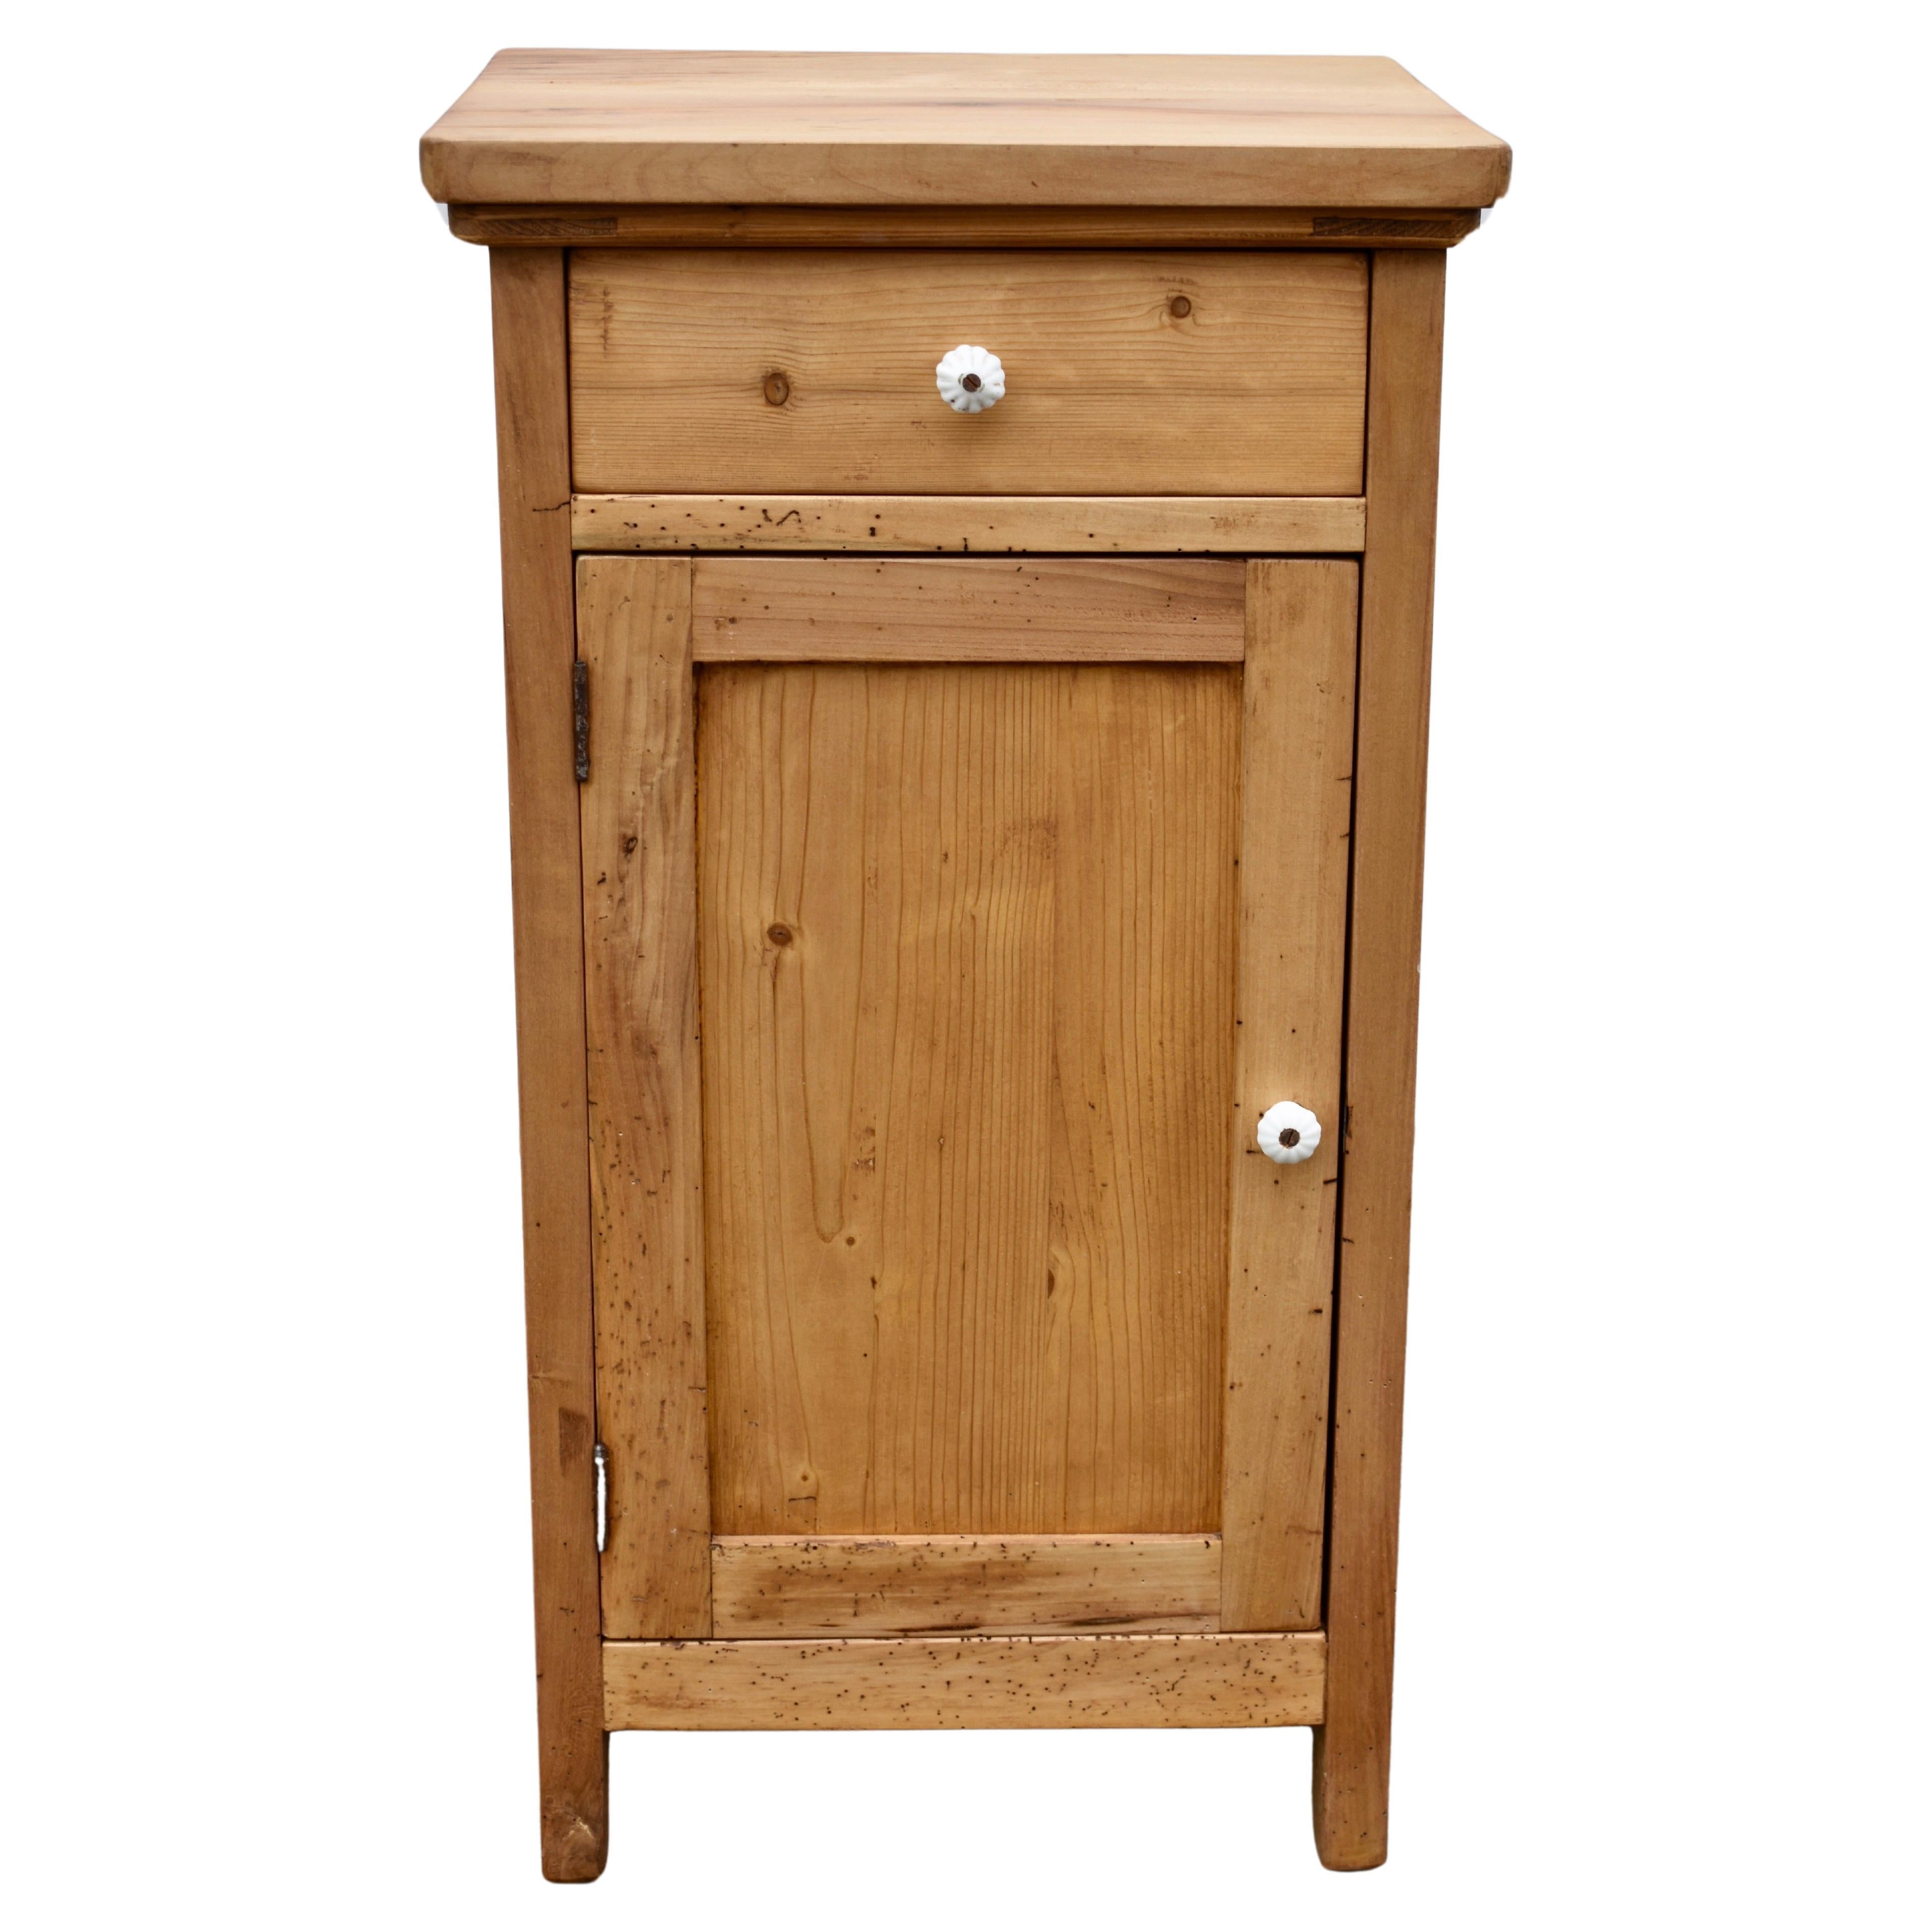 Pine and Beech Nightstand with One Door and One Drawer